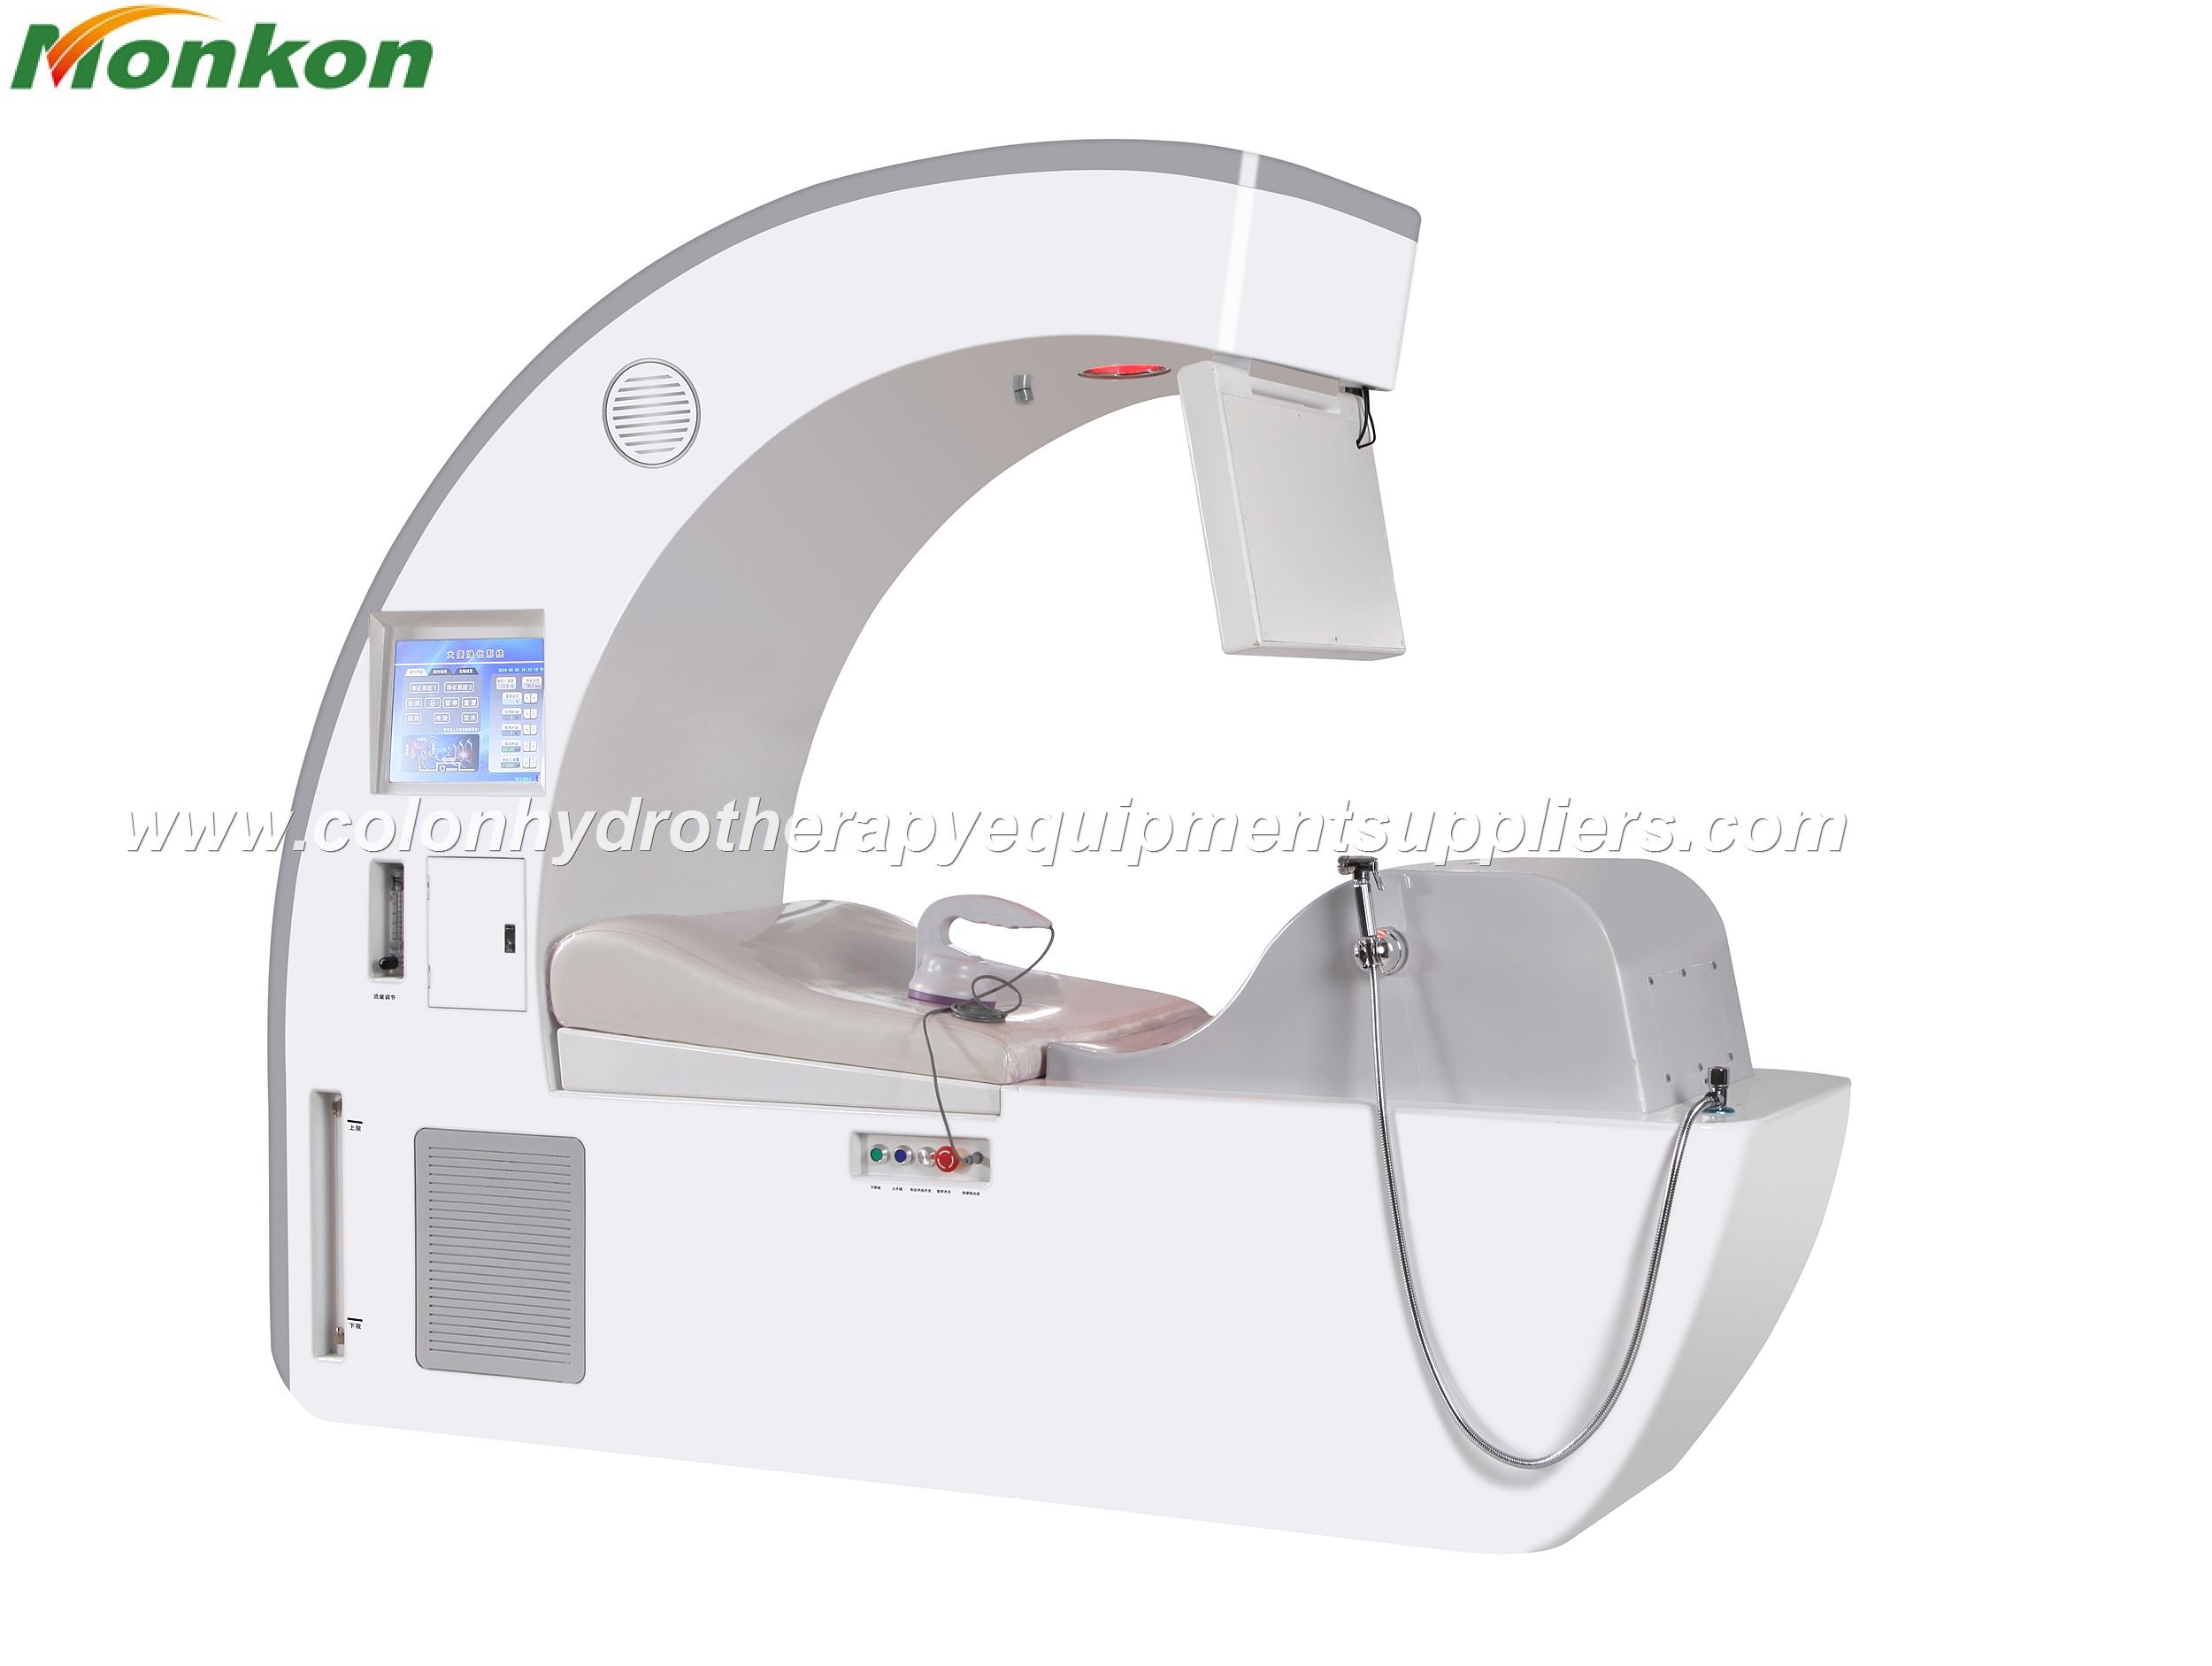 Professional Colon Hydrotherapy Equipment